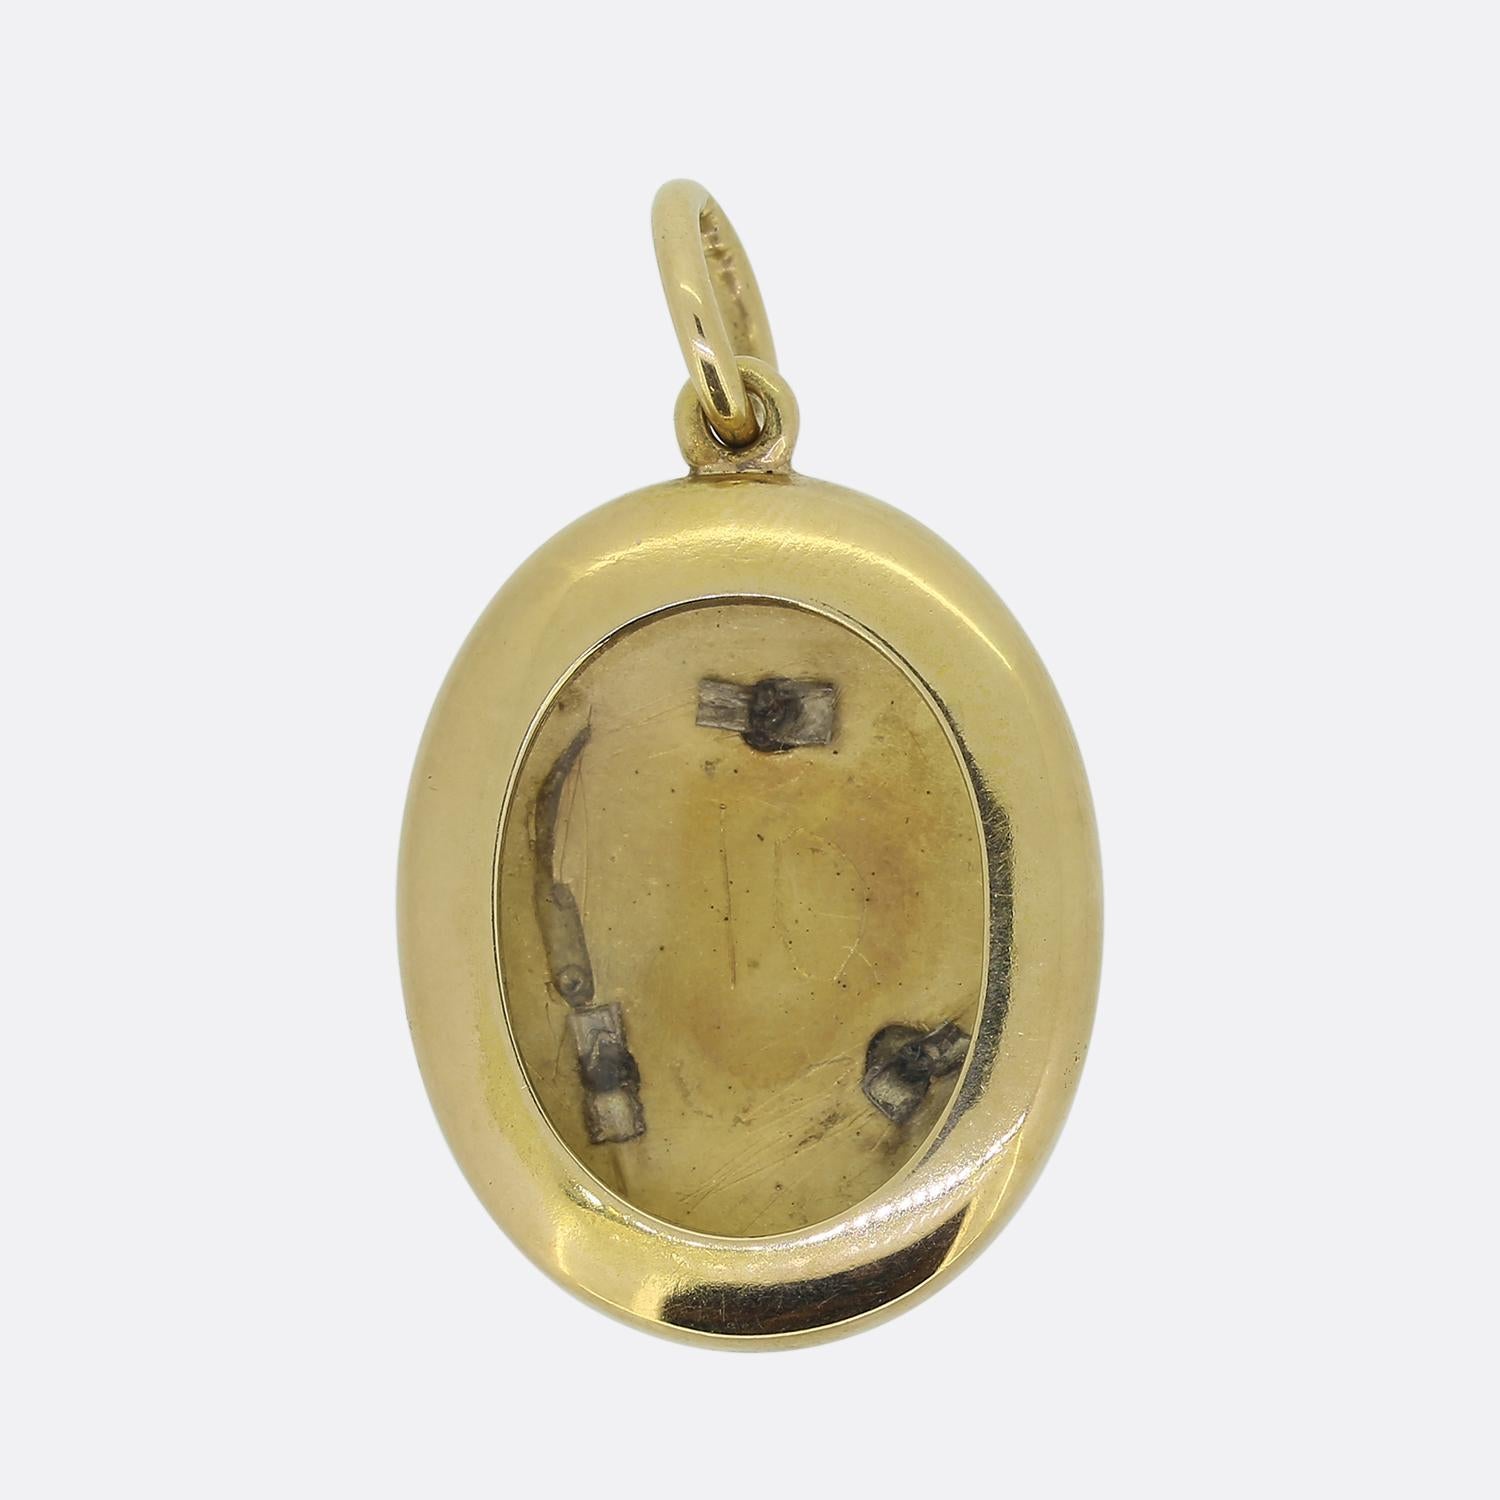 Here we have a 15ct yellow gold pendant dating back to the Victorian era. The pendant features a horseshoe design formed out of turquoise and pearl with a blue enamel border. The locket does still have its back so a picture could be added